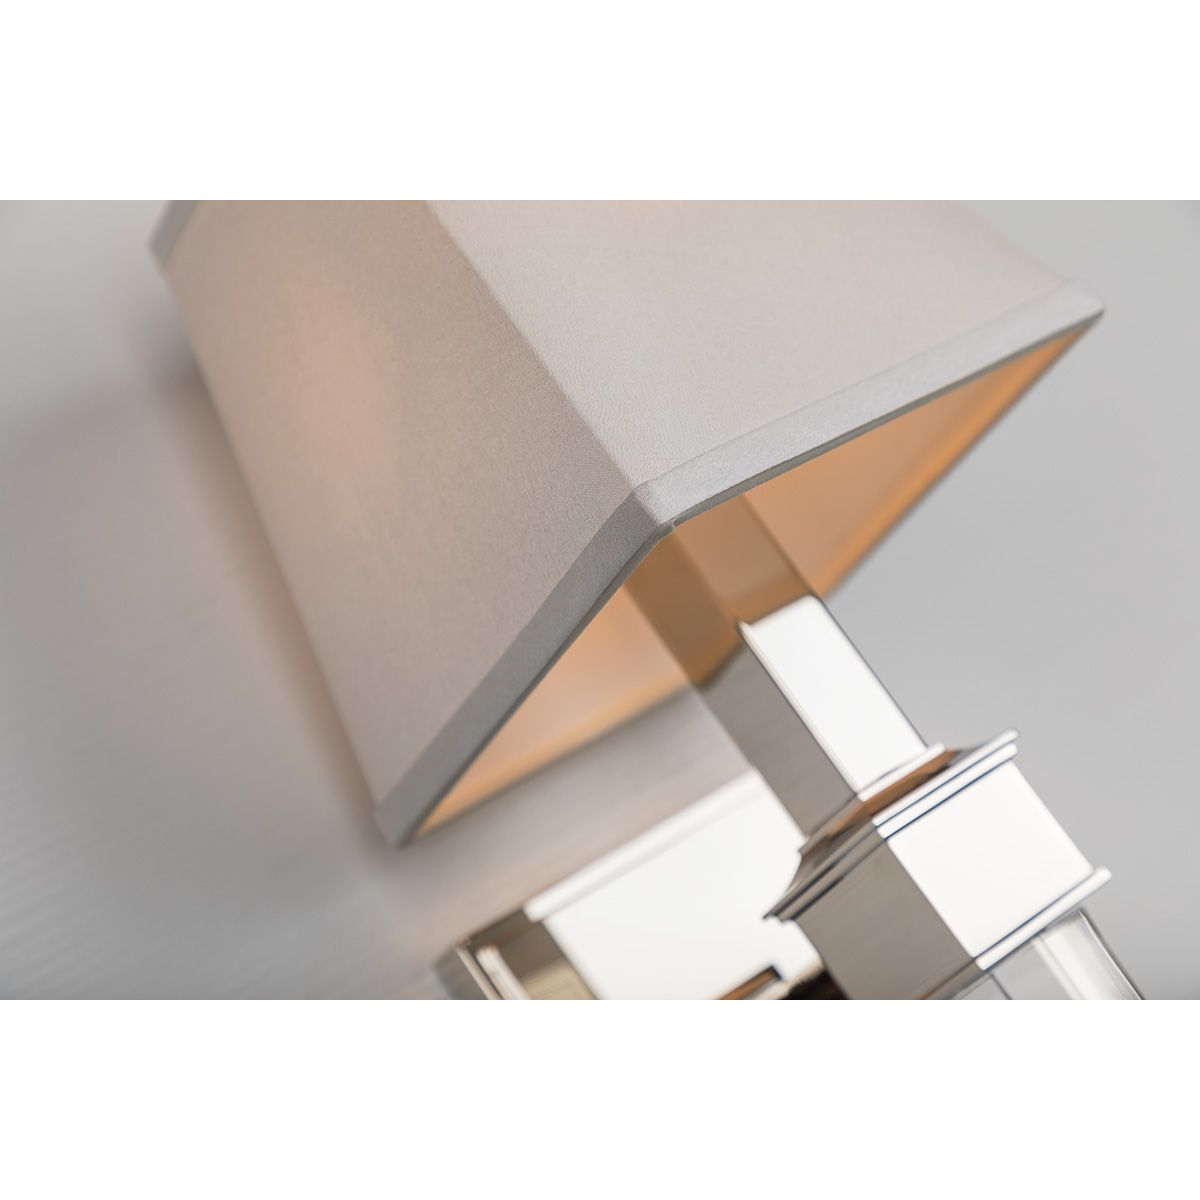 Ruskin 21 in. Armed Sconce